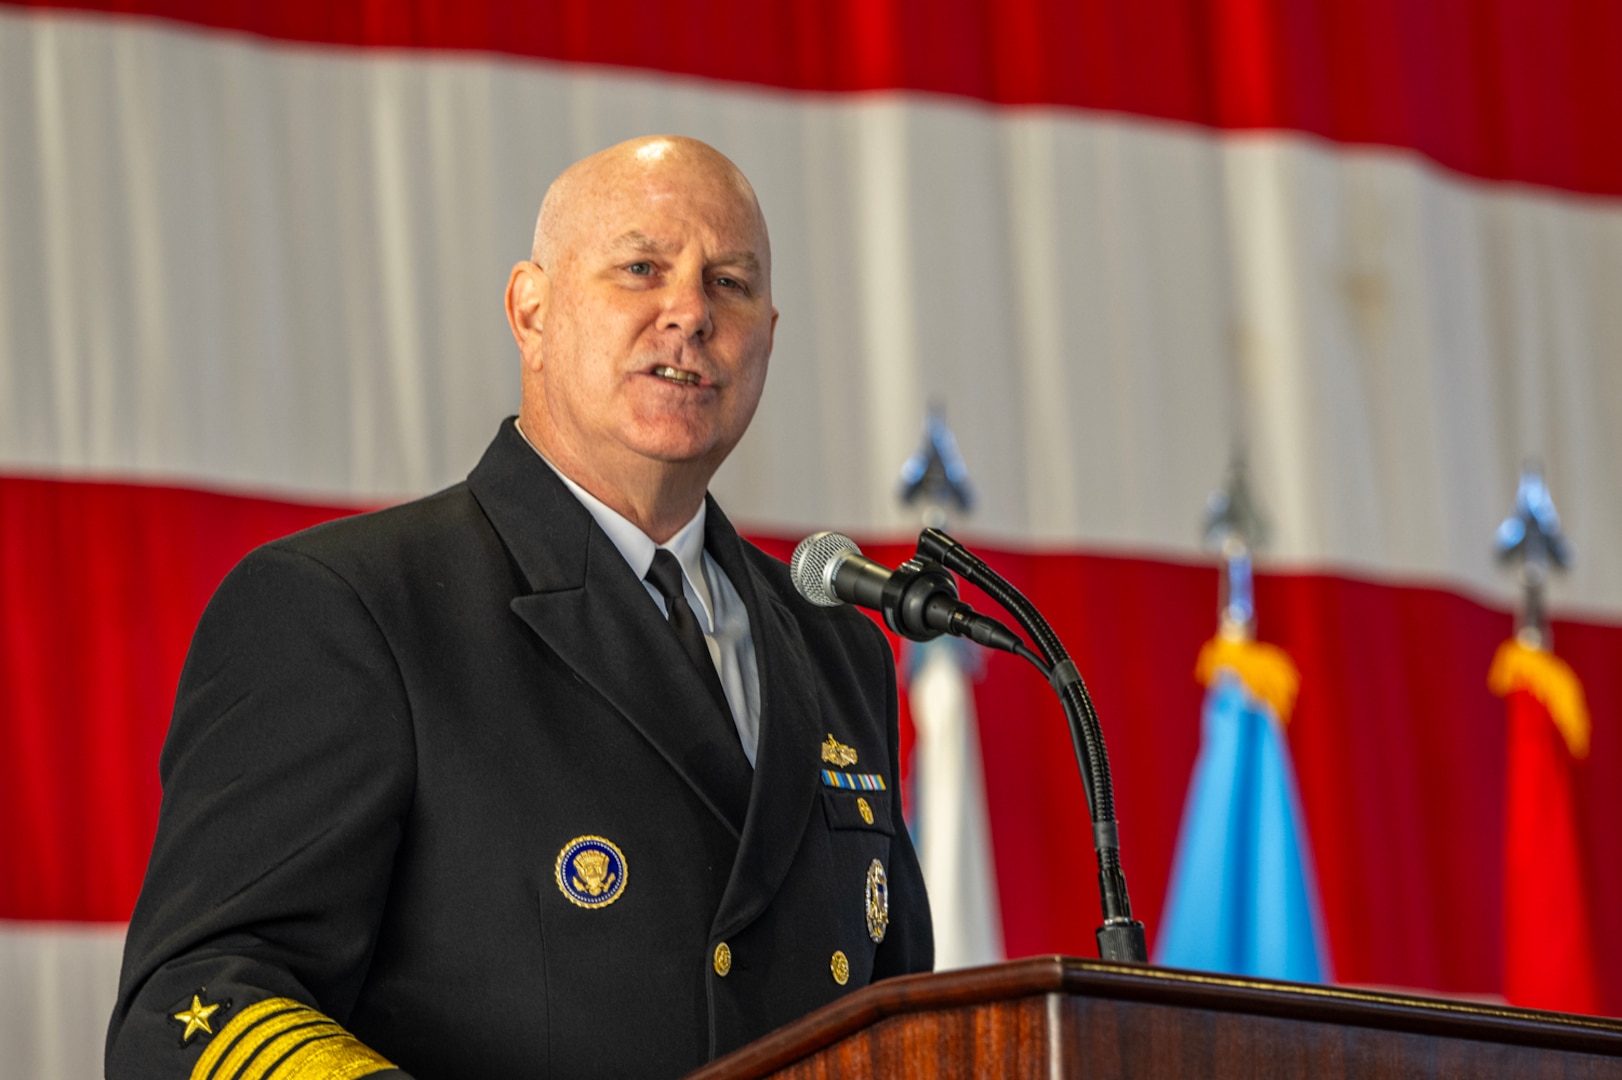 USSPACECOM welcomes Whiting as third commander